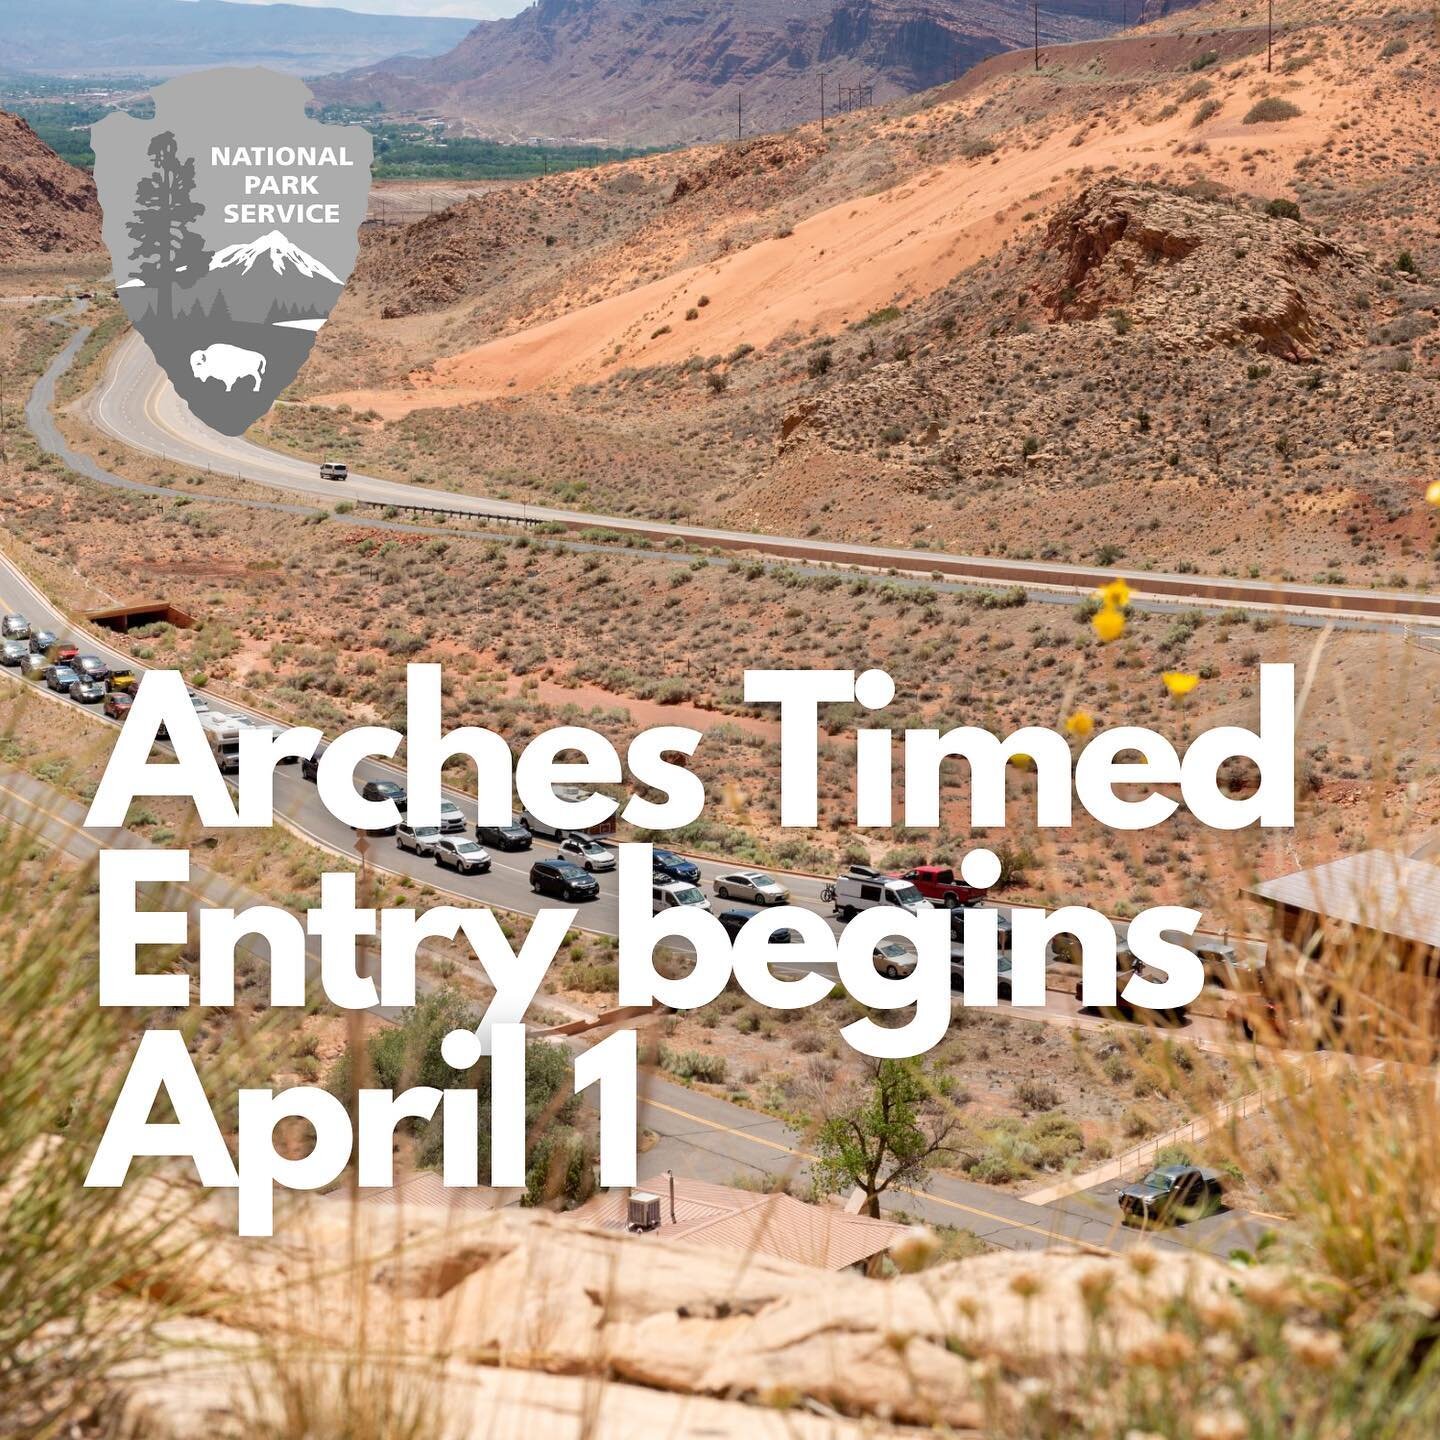 Starting Saturday April 1, 2023, Arches National Park will implement a pilot, temporary timed entry system to access the park. From April 1 to October 31, 2023, between 7 a.m. and 4 p.m. daily, visitors will need to purchase a timed entry reservation